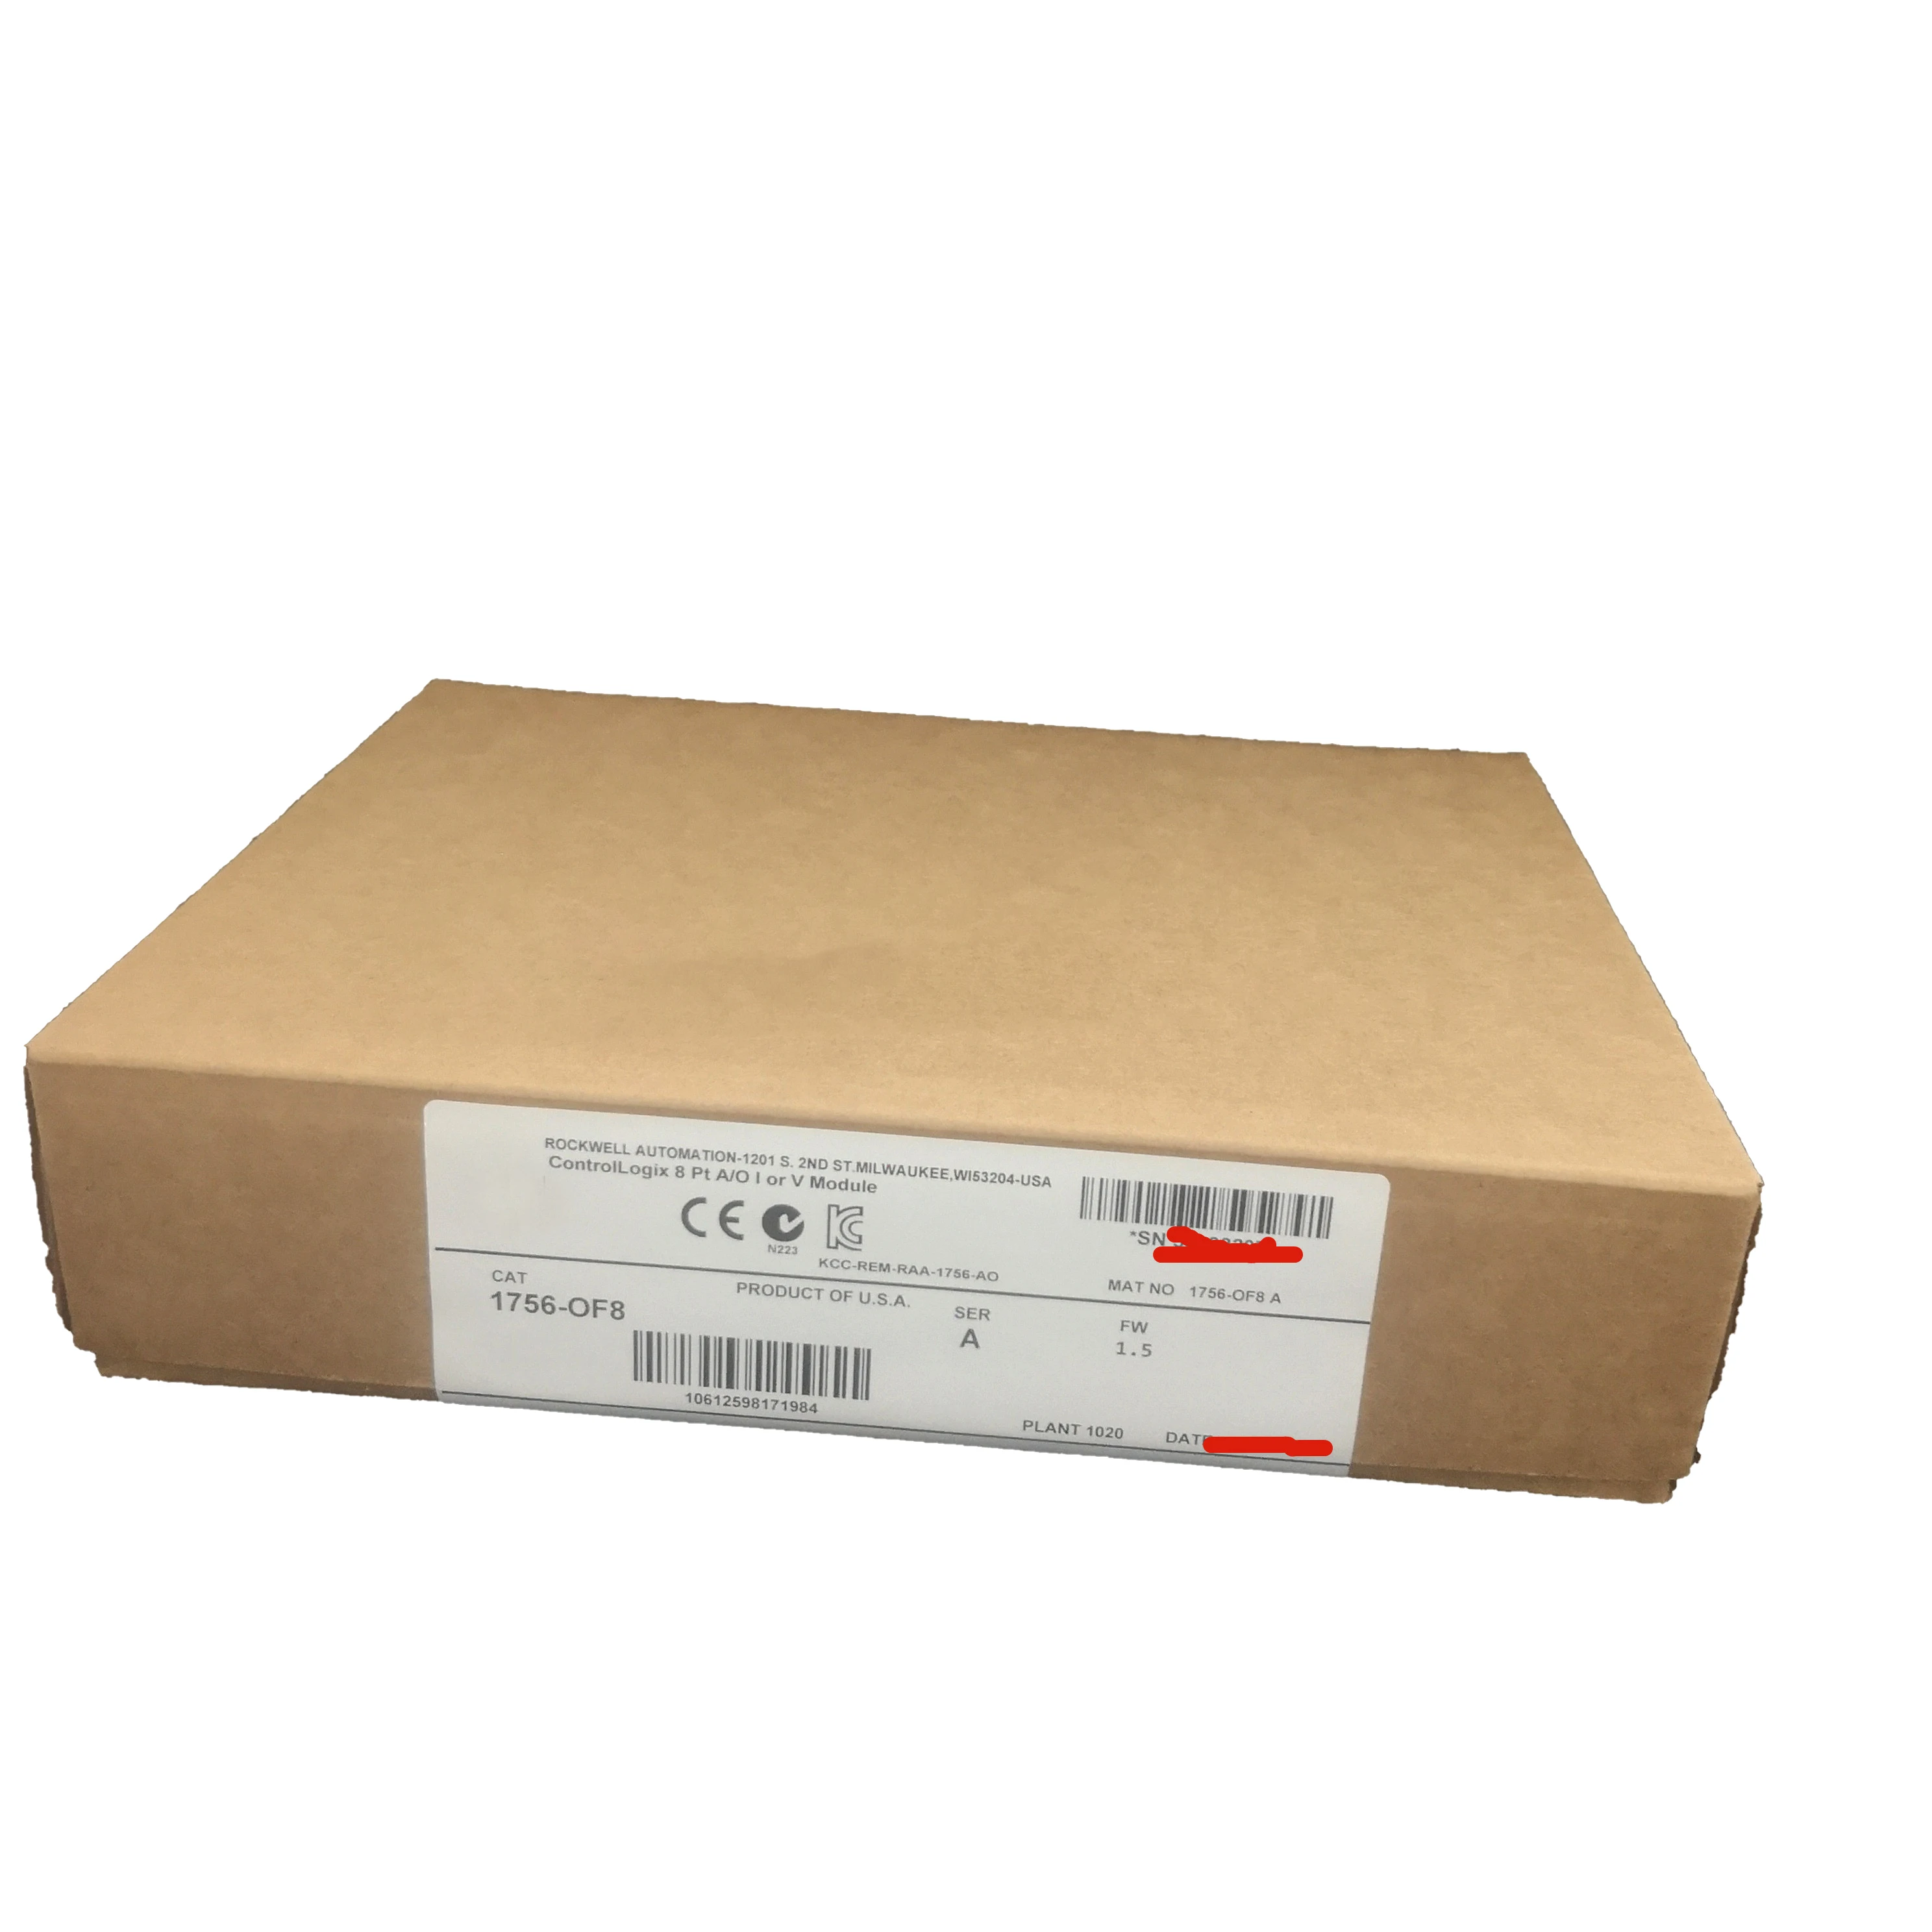 

New Original In BOX 1756-OF8 {Warehouse stock} 1 Year Warranty Shipment within 24 hours